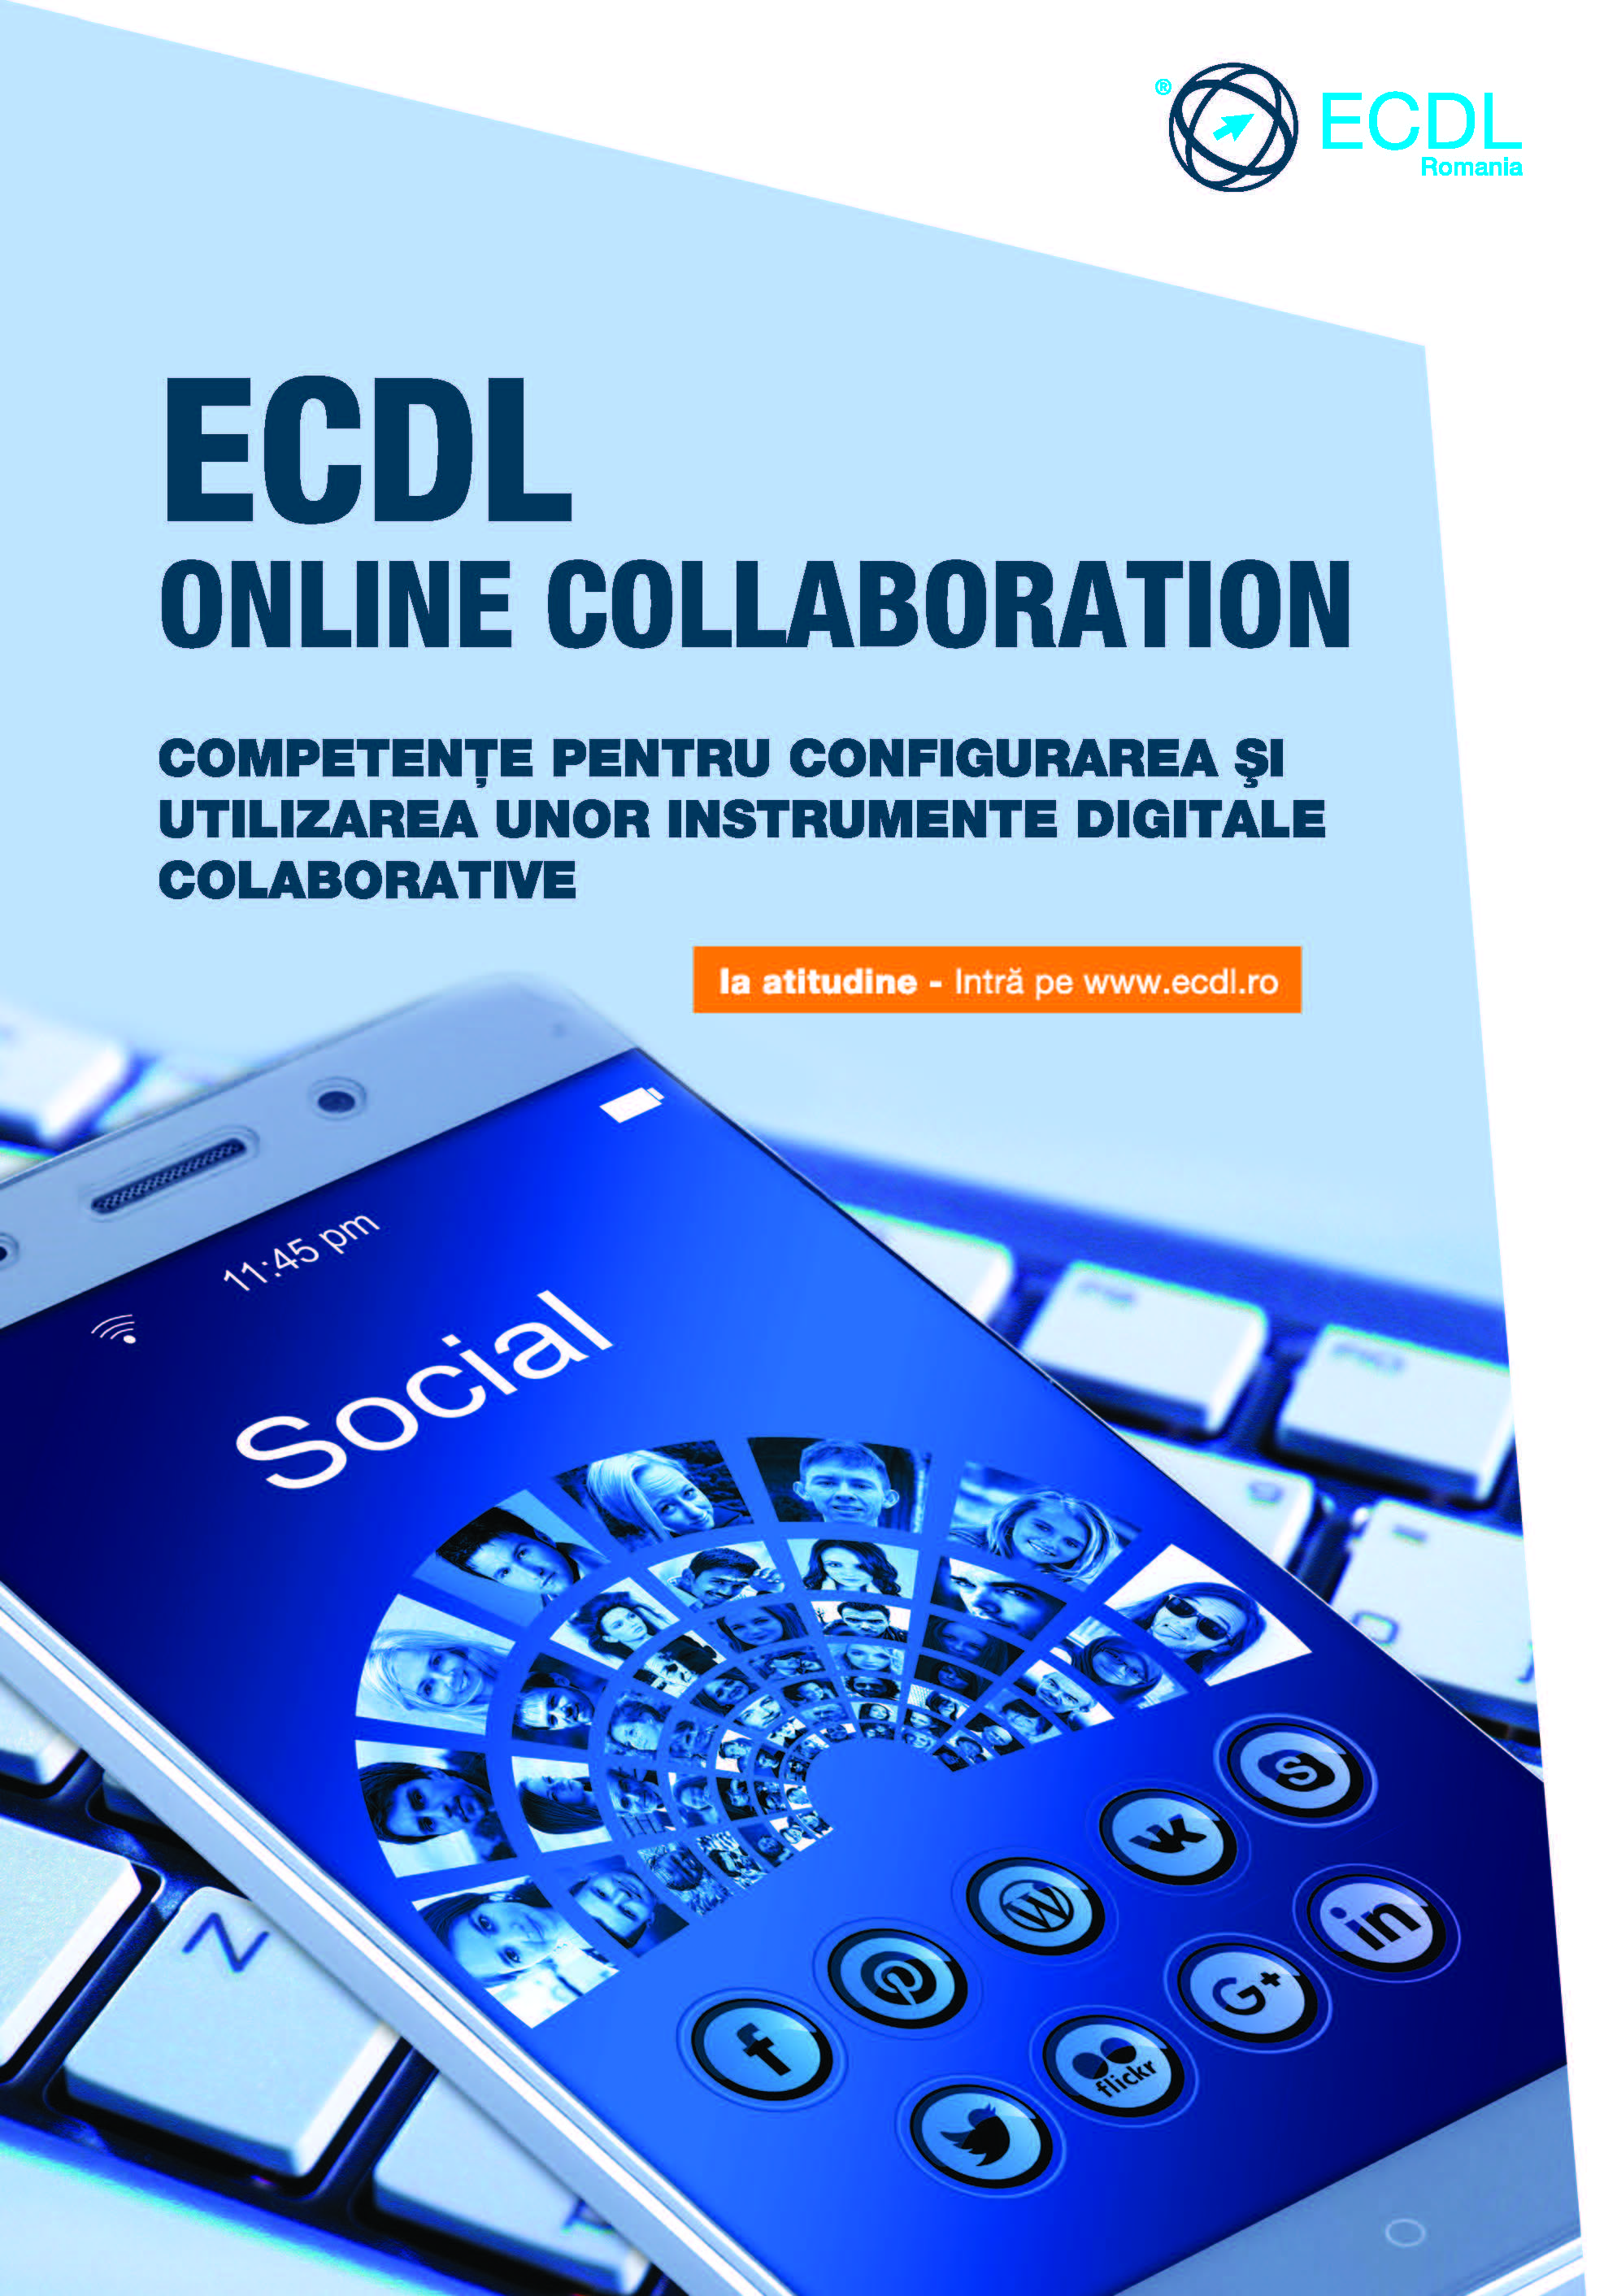 coupler Grab easy to be hurt Online Collaboration • ECDL - Romania